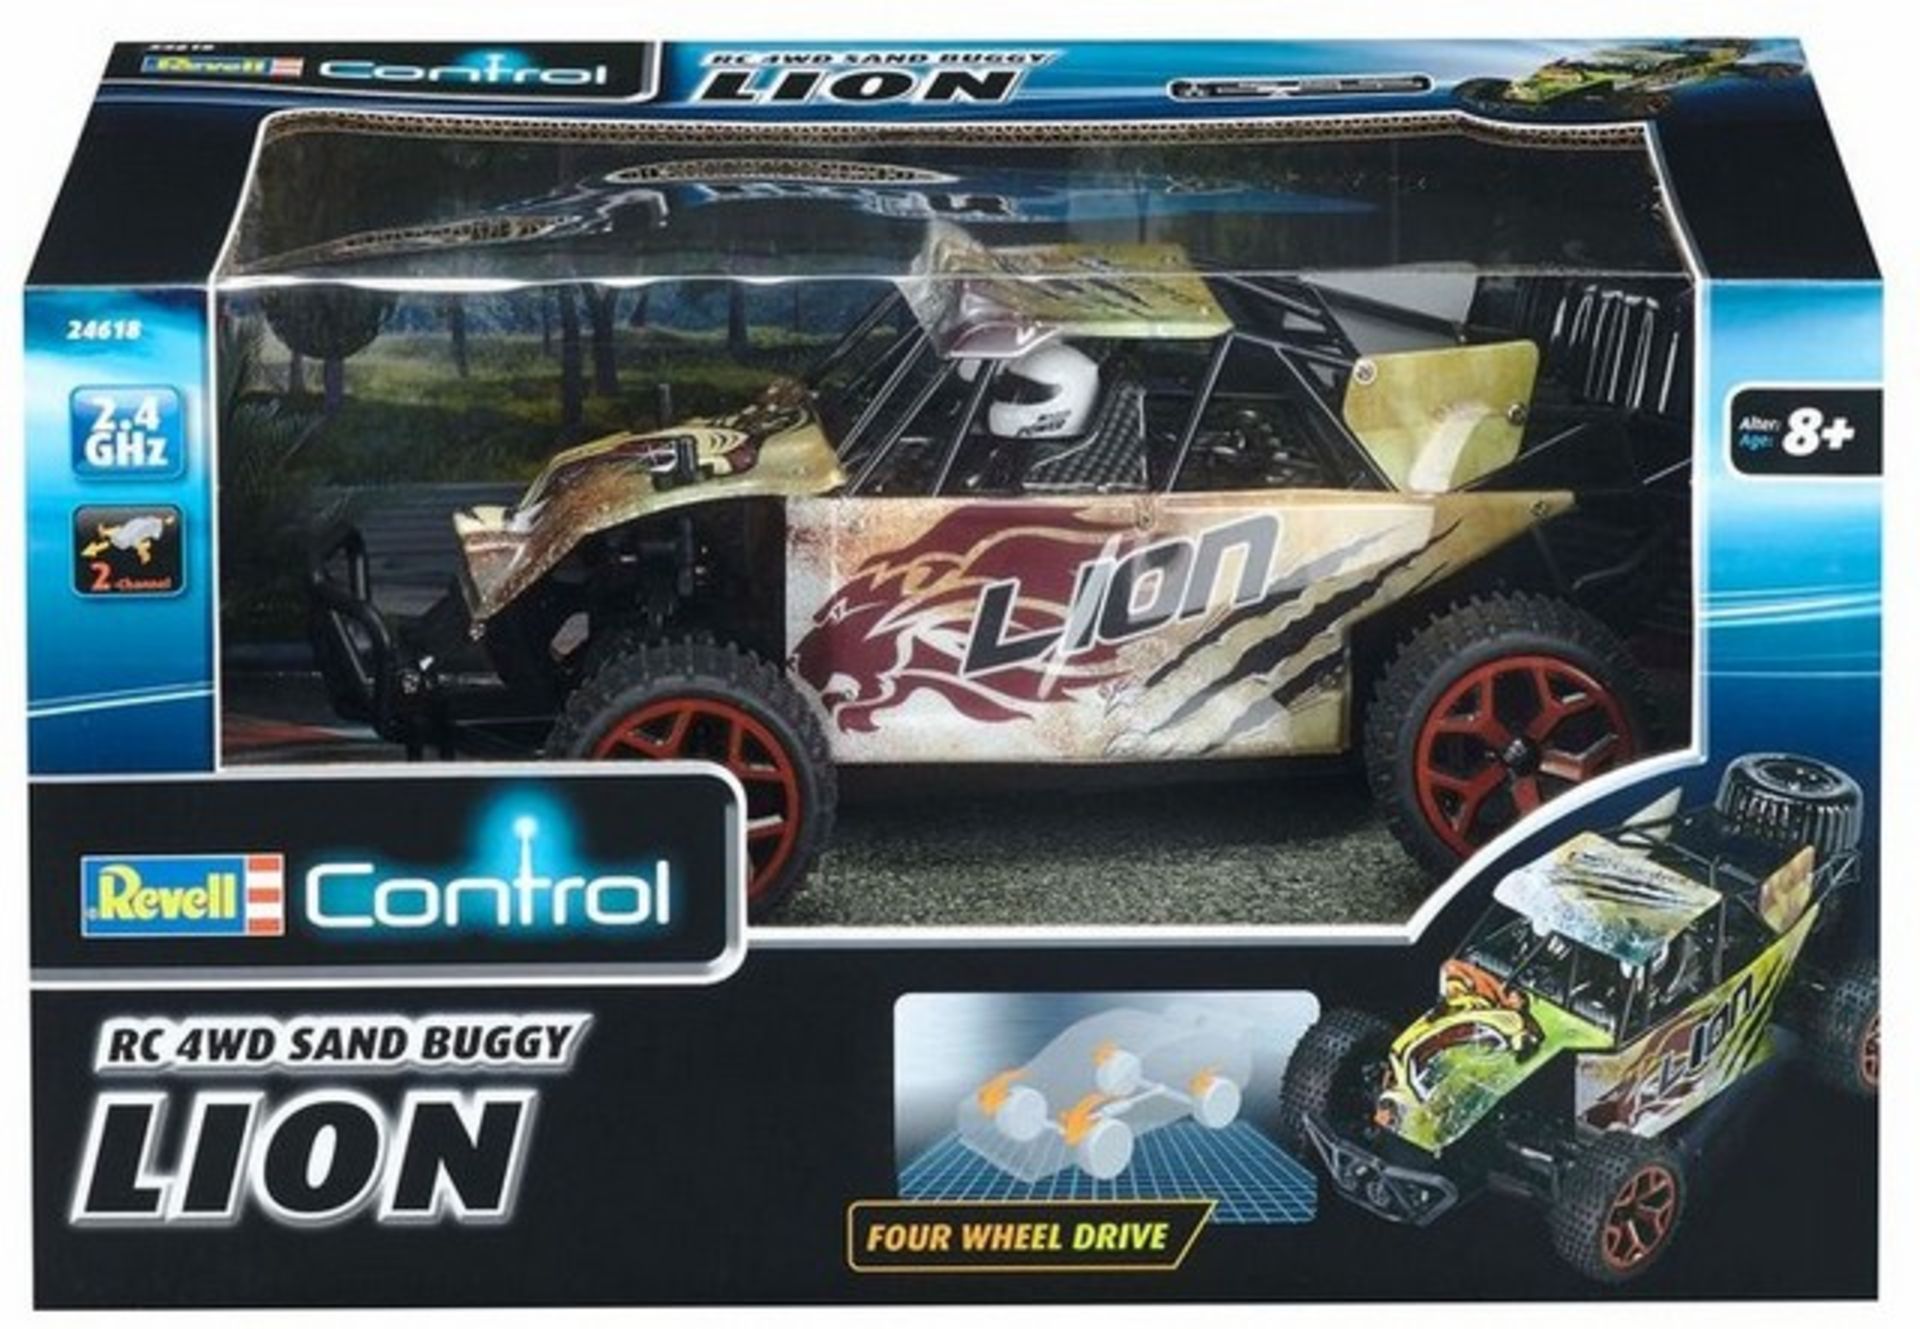 V Brand New Revell R/C 4 Wheel Drive Sand Buggy Lion Up To 15 kph 2.4GHz 2 Channel Remote Control - Image 2 of 2